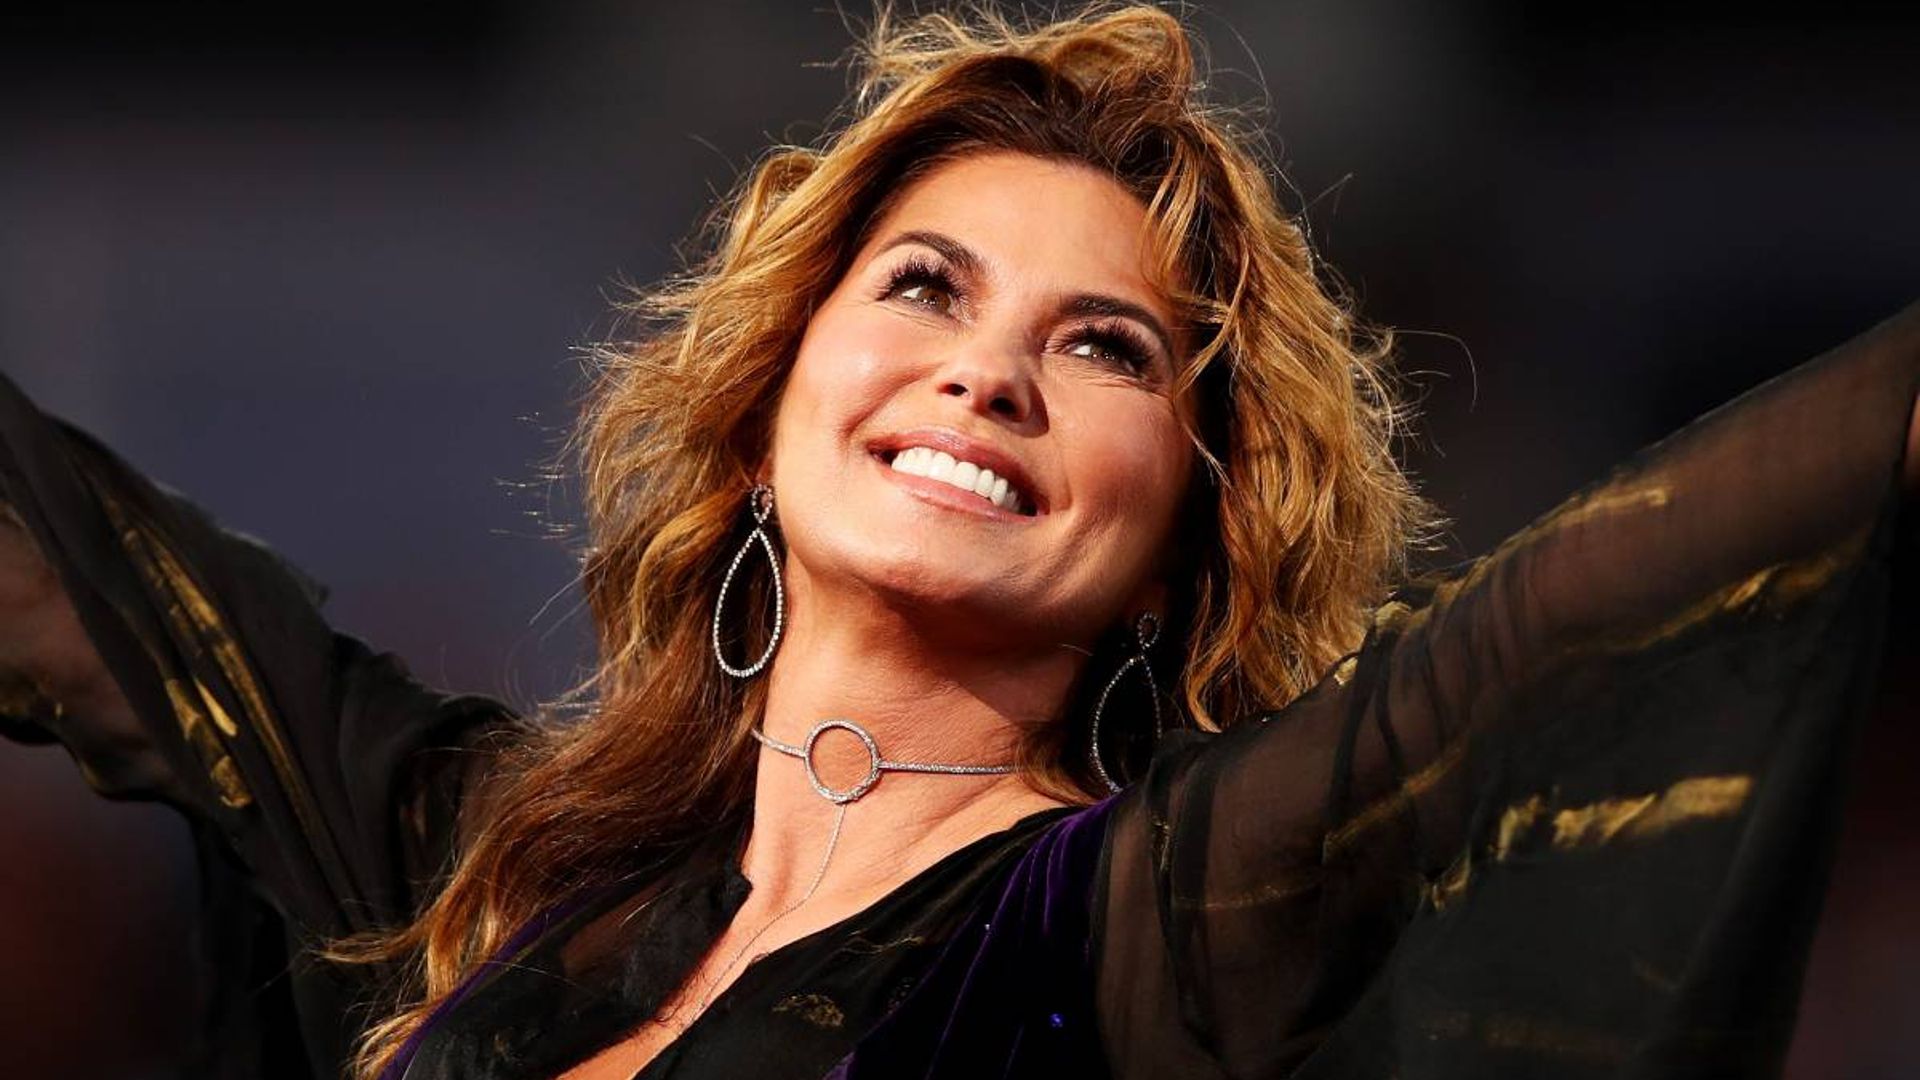 Shania Twain resembles a movie star in chic outfit during adventures in Switzerland